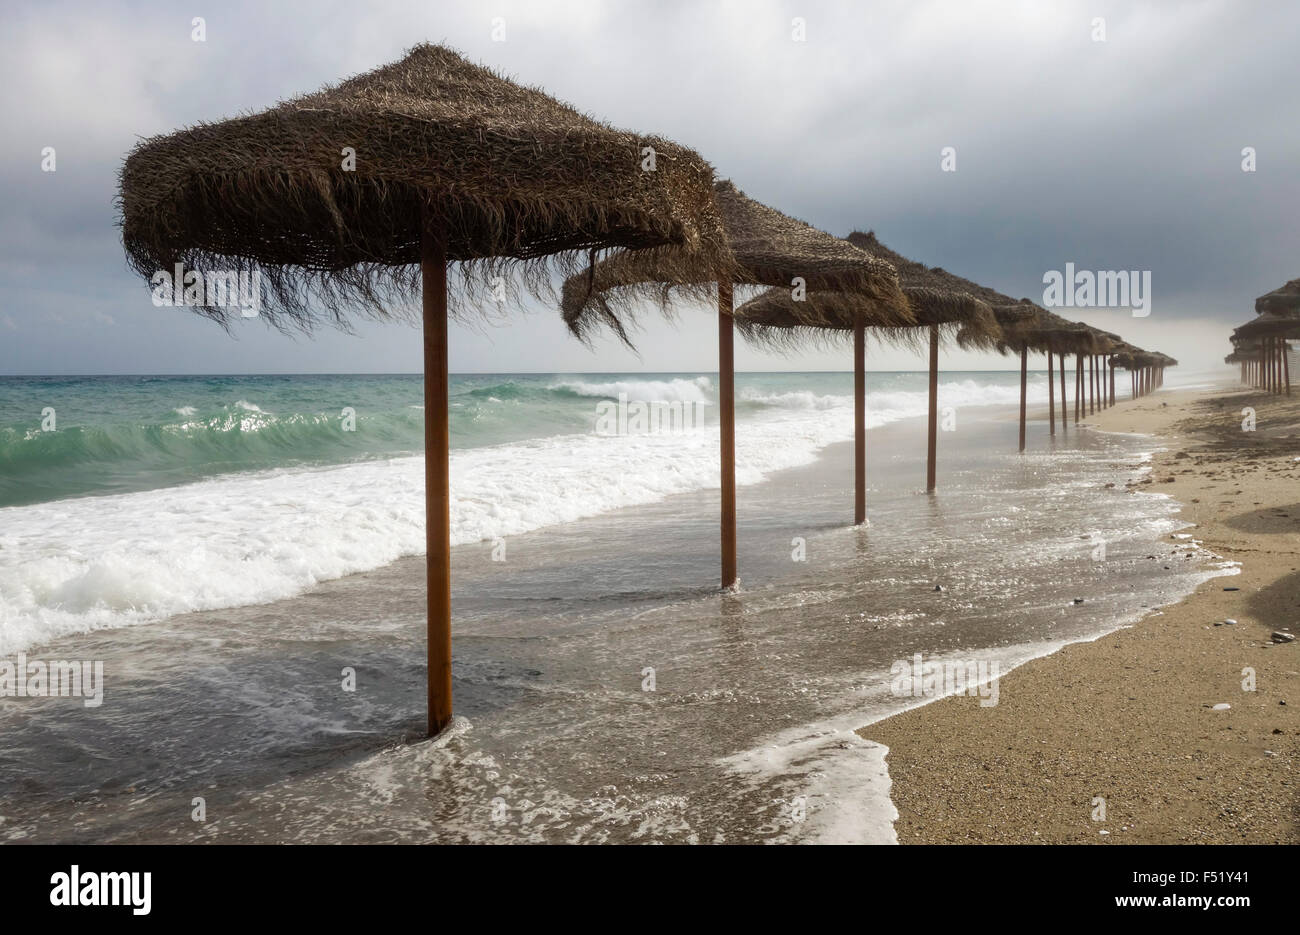 Mediterranean beach with parasols during bad weather, Spain. Stock Photo